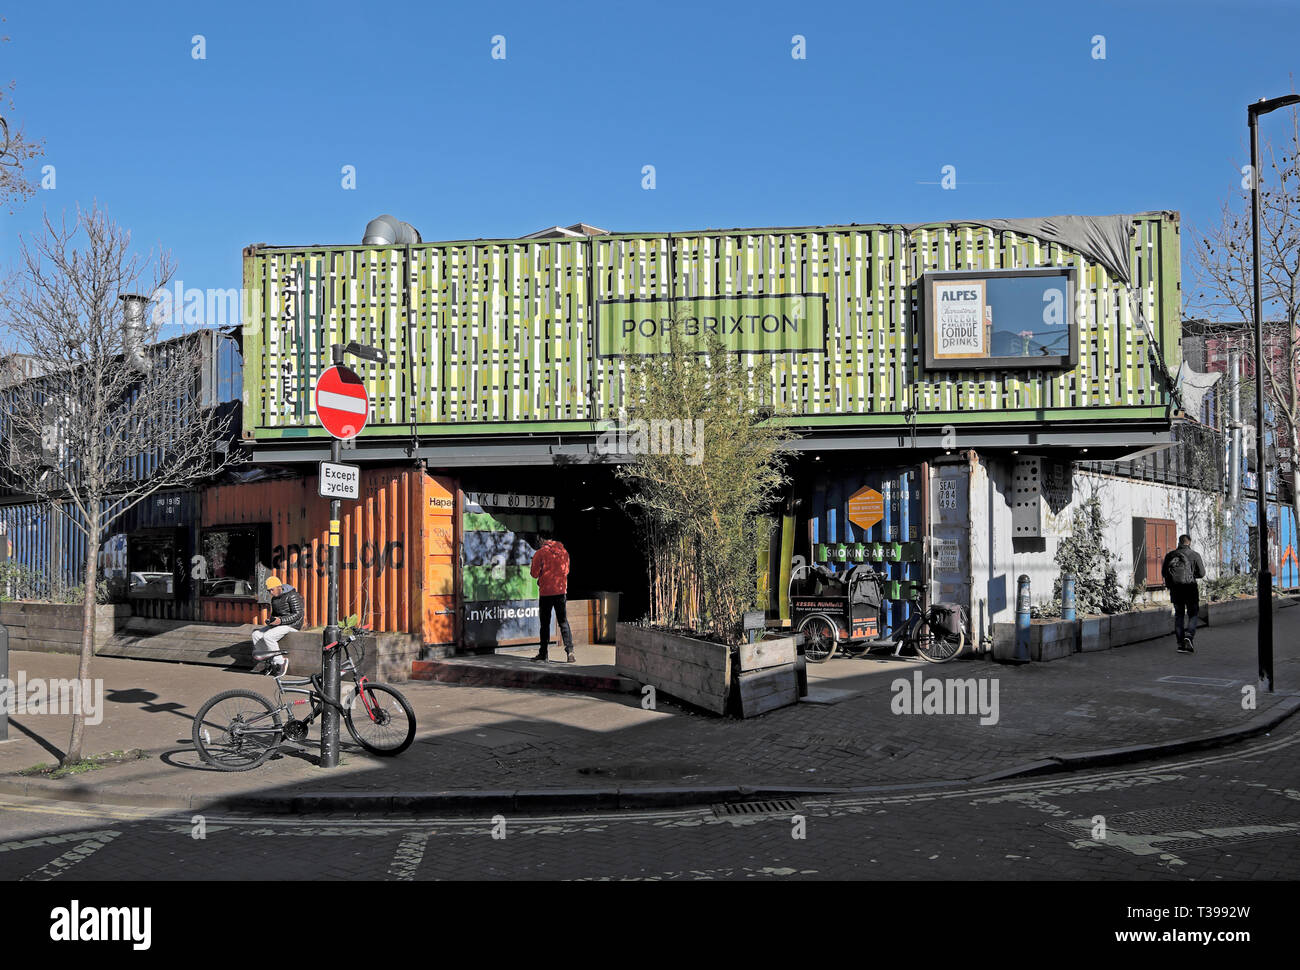 Exterior view of facade 'Pop Brixton' temporary business projects and street food restaurants in Brixton South London SW9 England UK Stock Photo